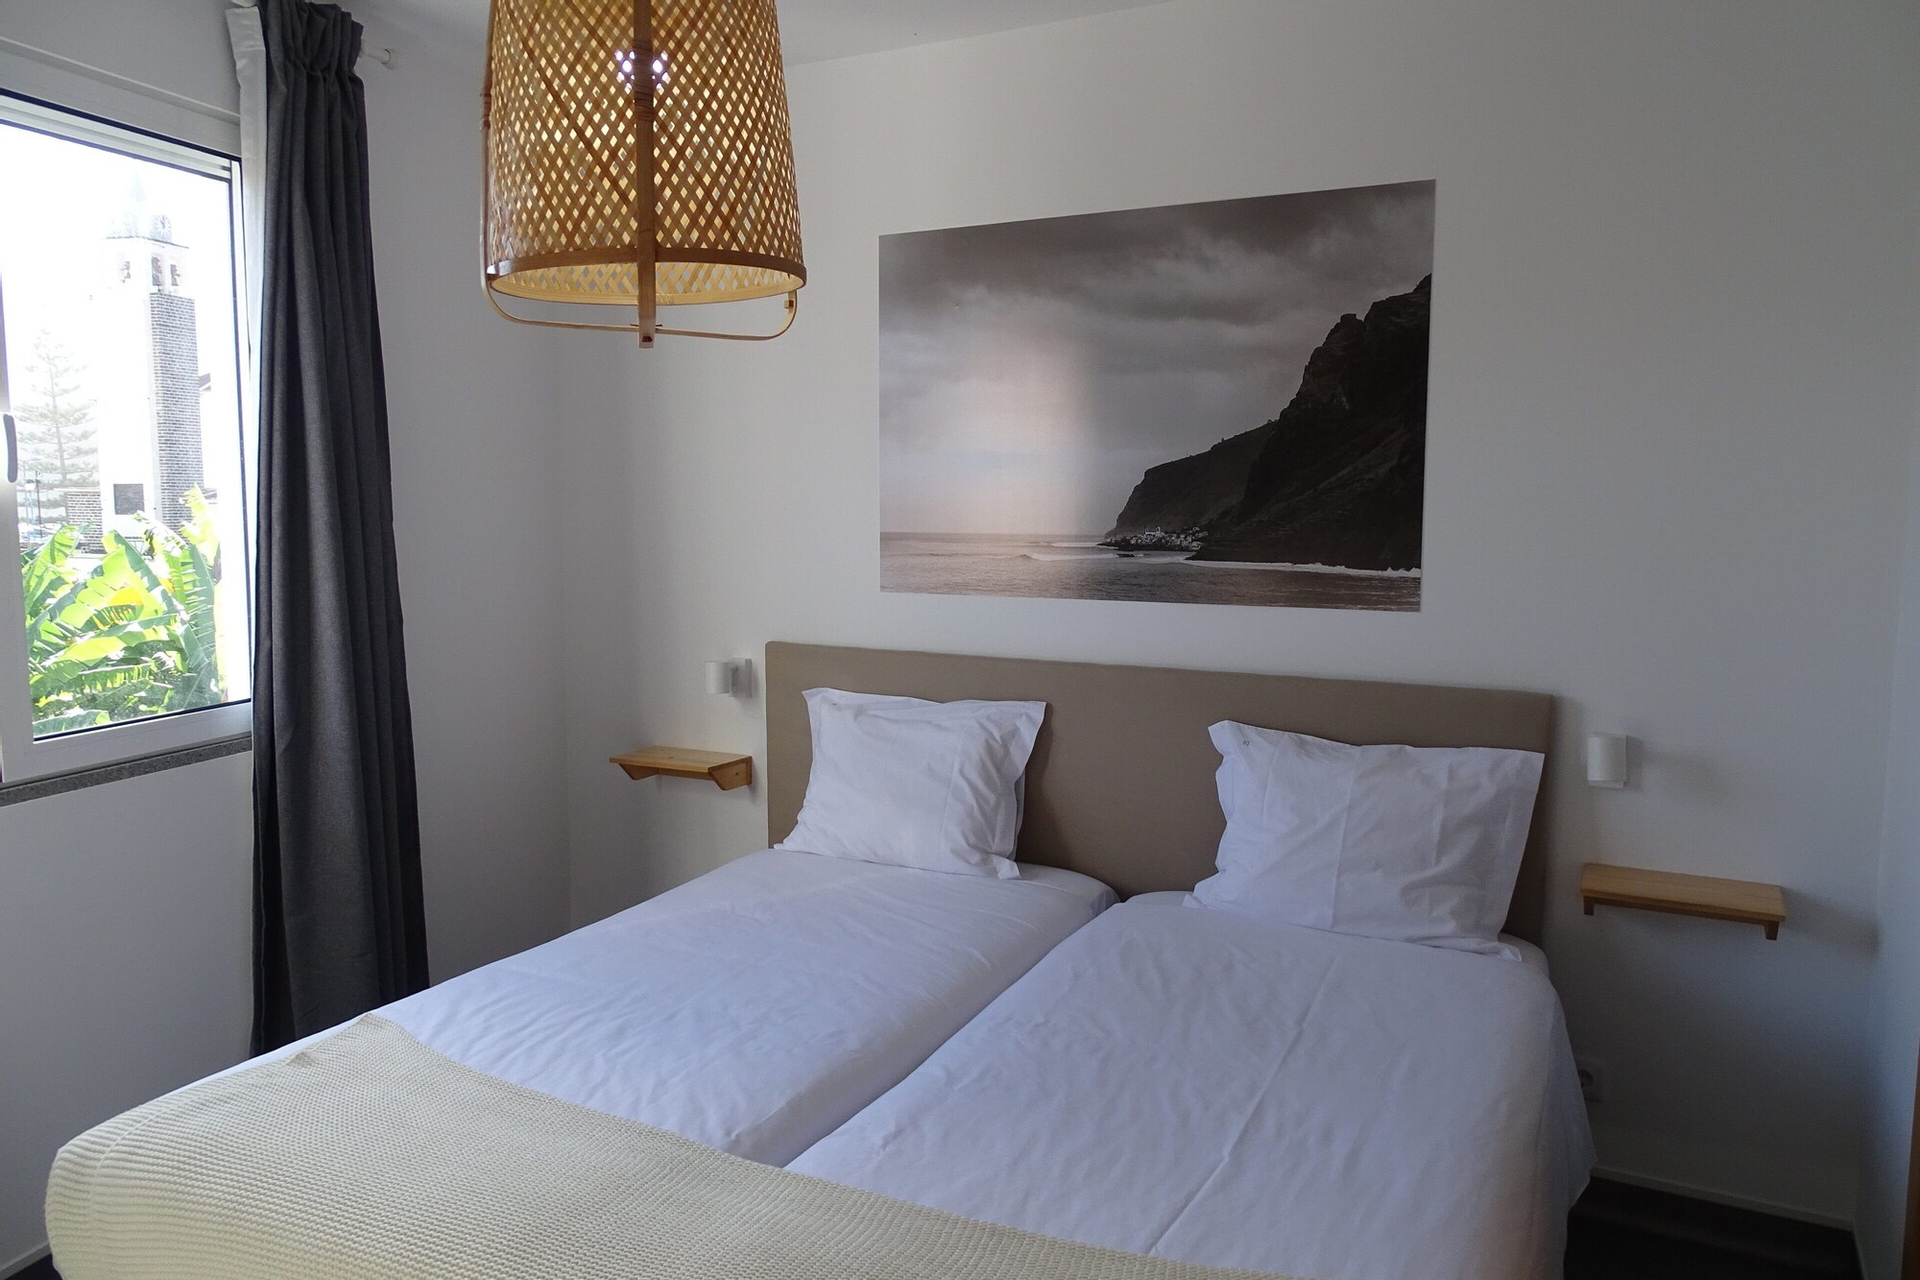 Room 5, In the Village, Between the sea and the Mountains - Madeira Surf Camp I, Machico